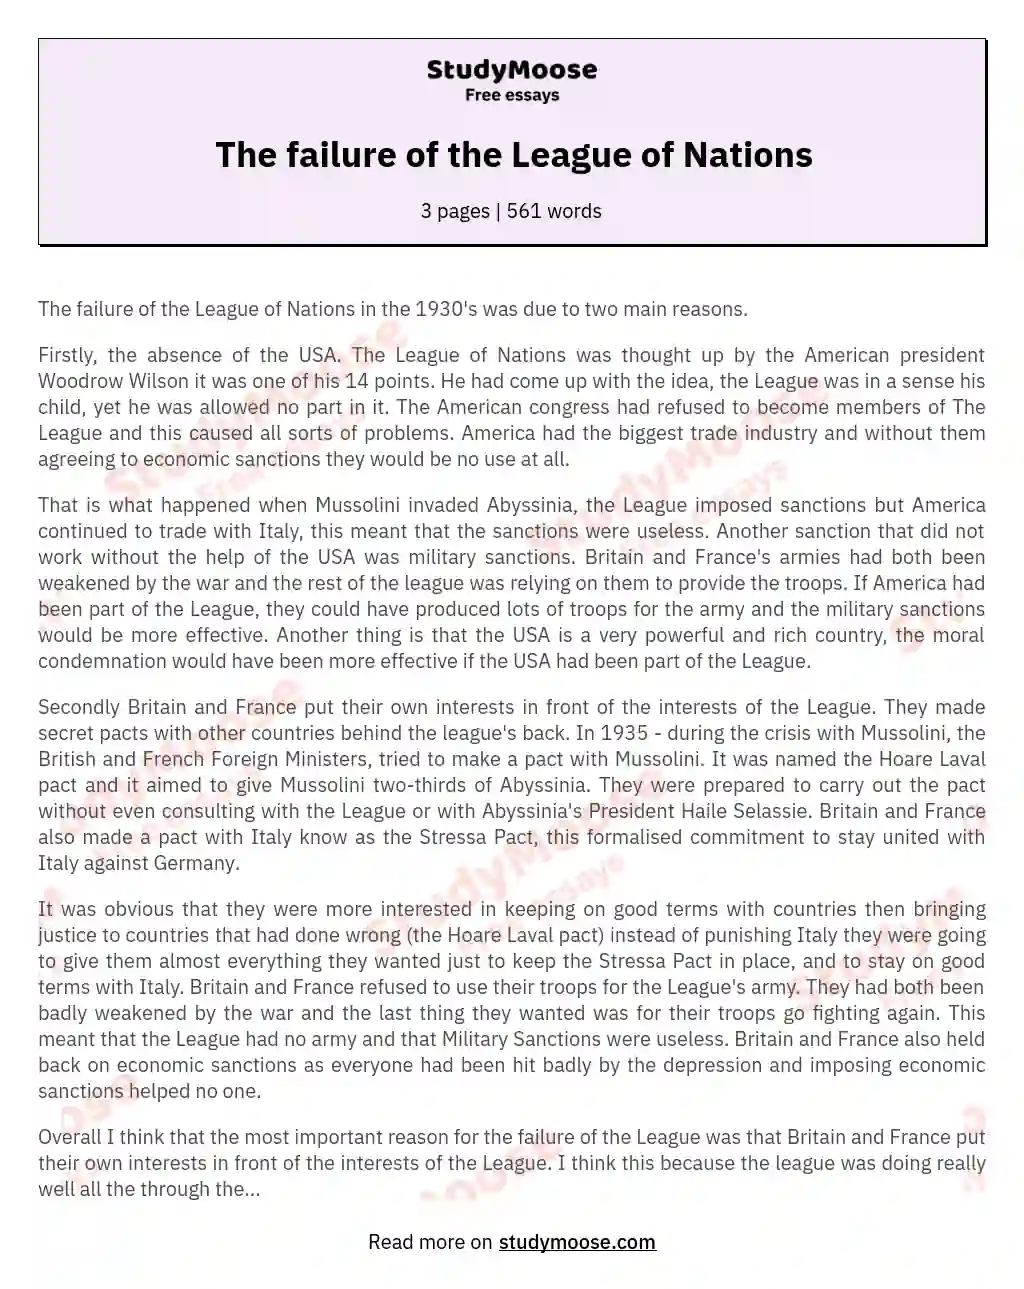 The failure of the League of Nations